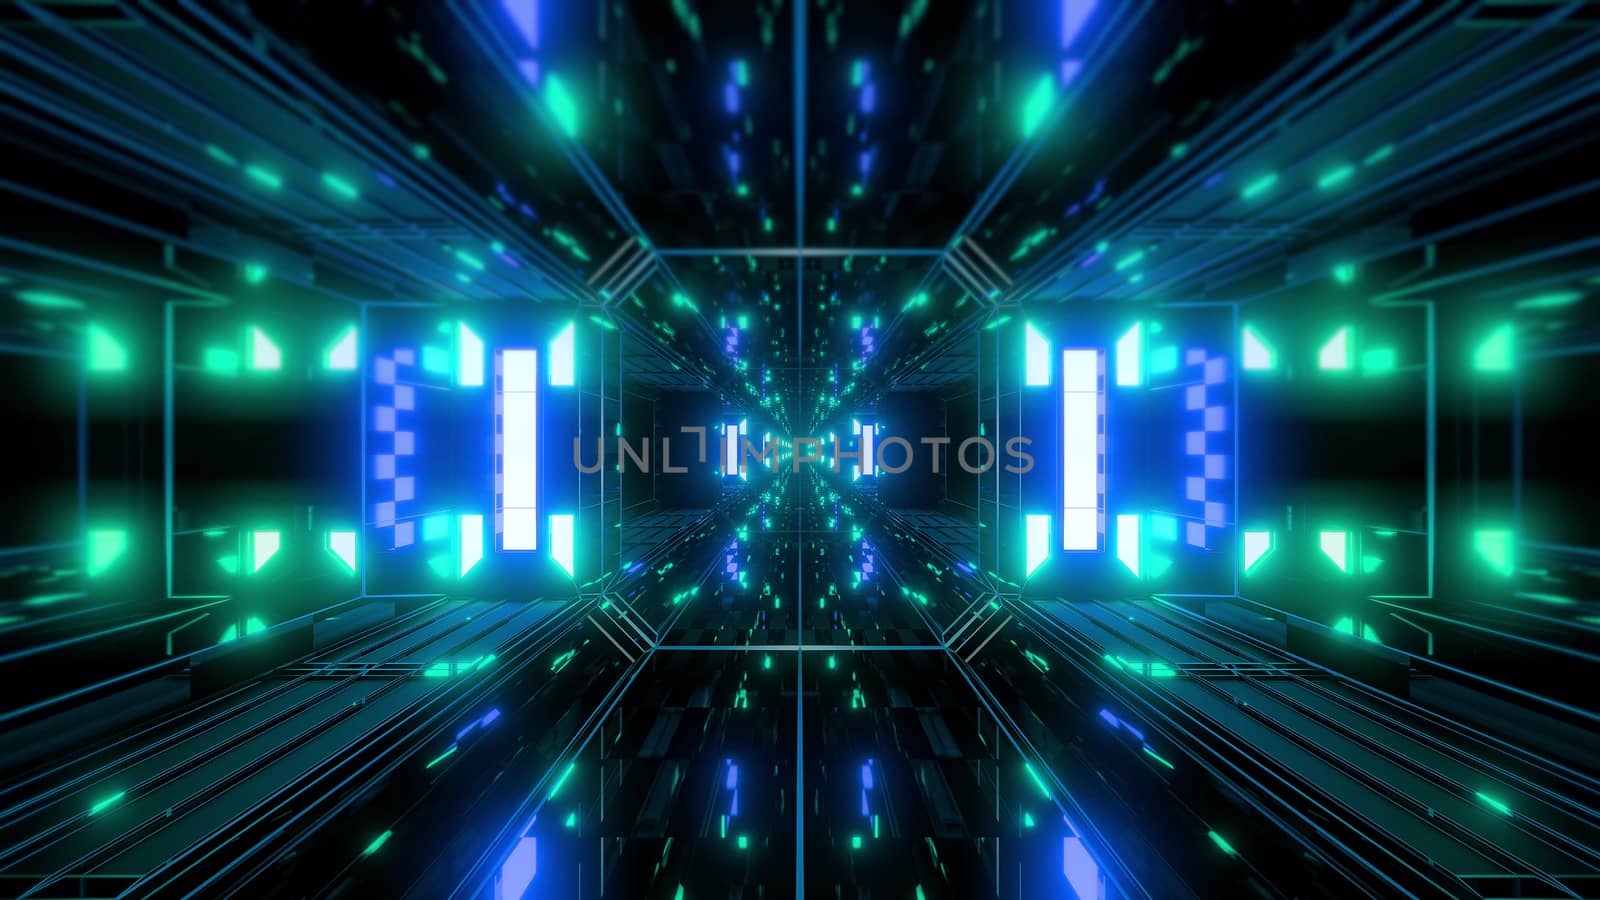 dak reflective scifi tunnel background with nicec glow 3d illustration 3d rendering by tunnelmotions